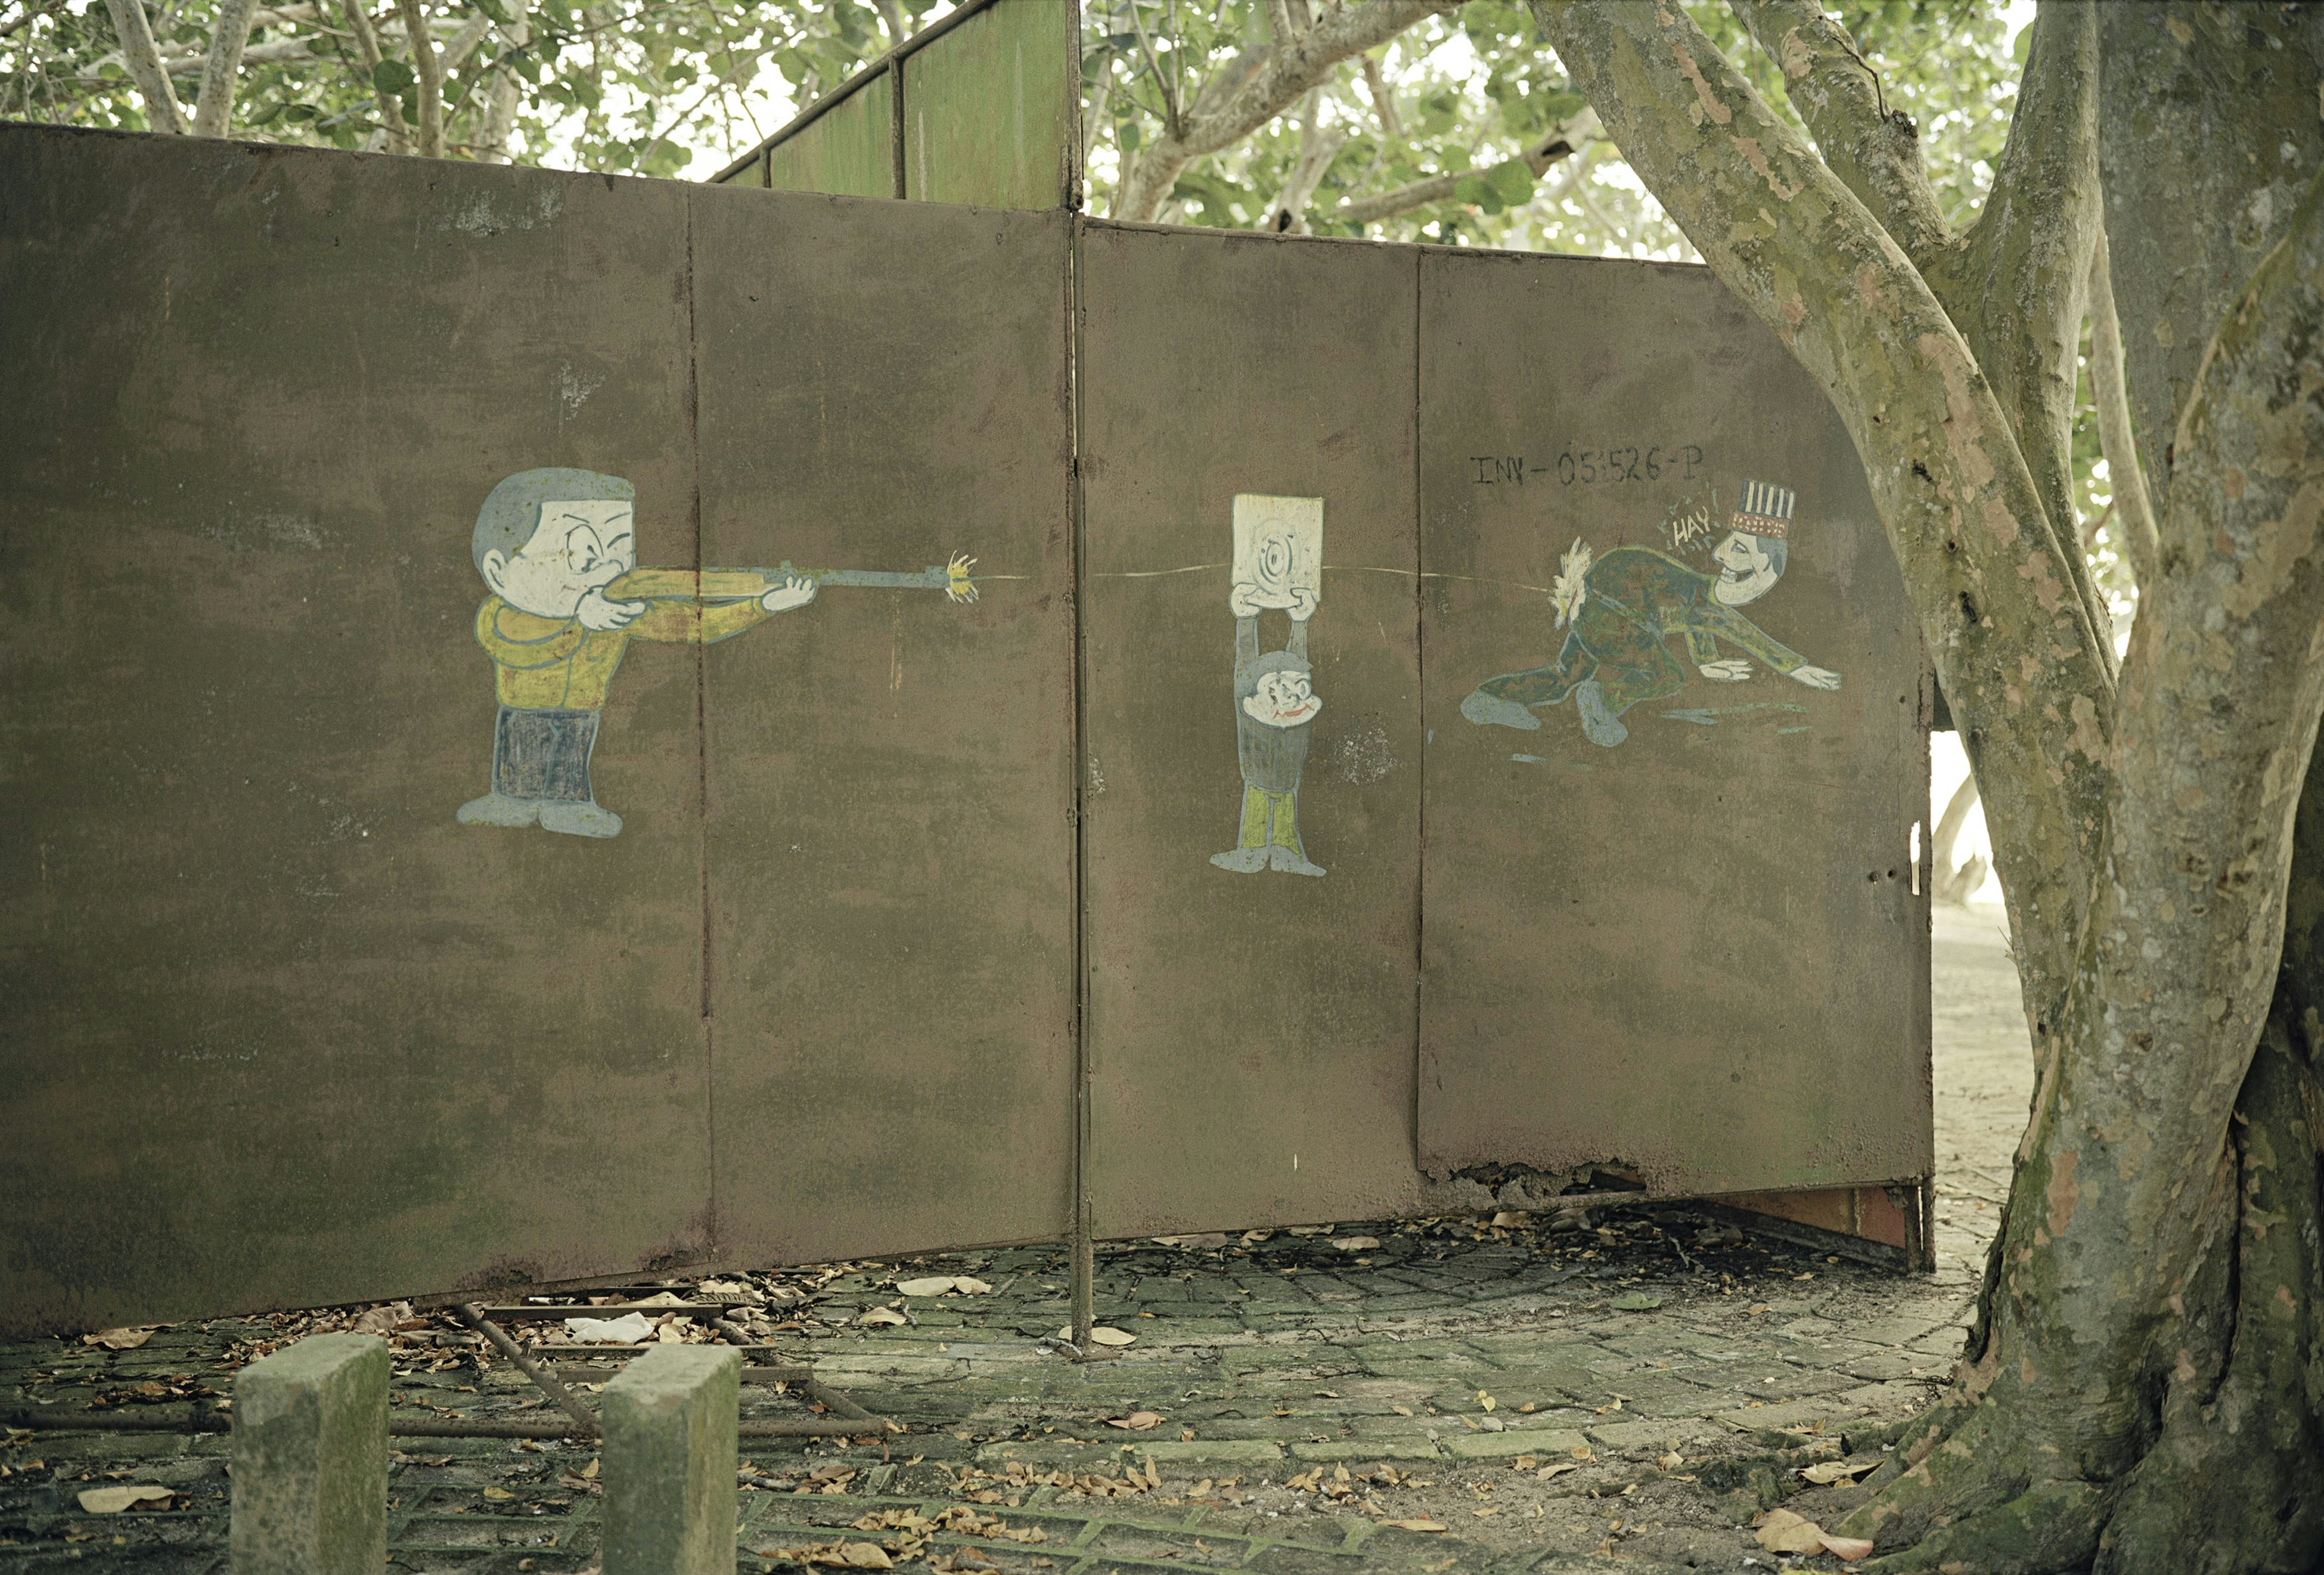 A mural covers a bathhouse at a beach located on the peninsula of Playa Giron, where the Bay of Pigs invasion took place.